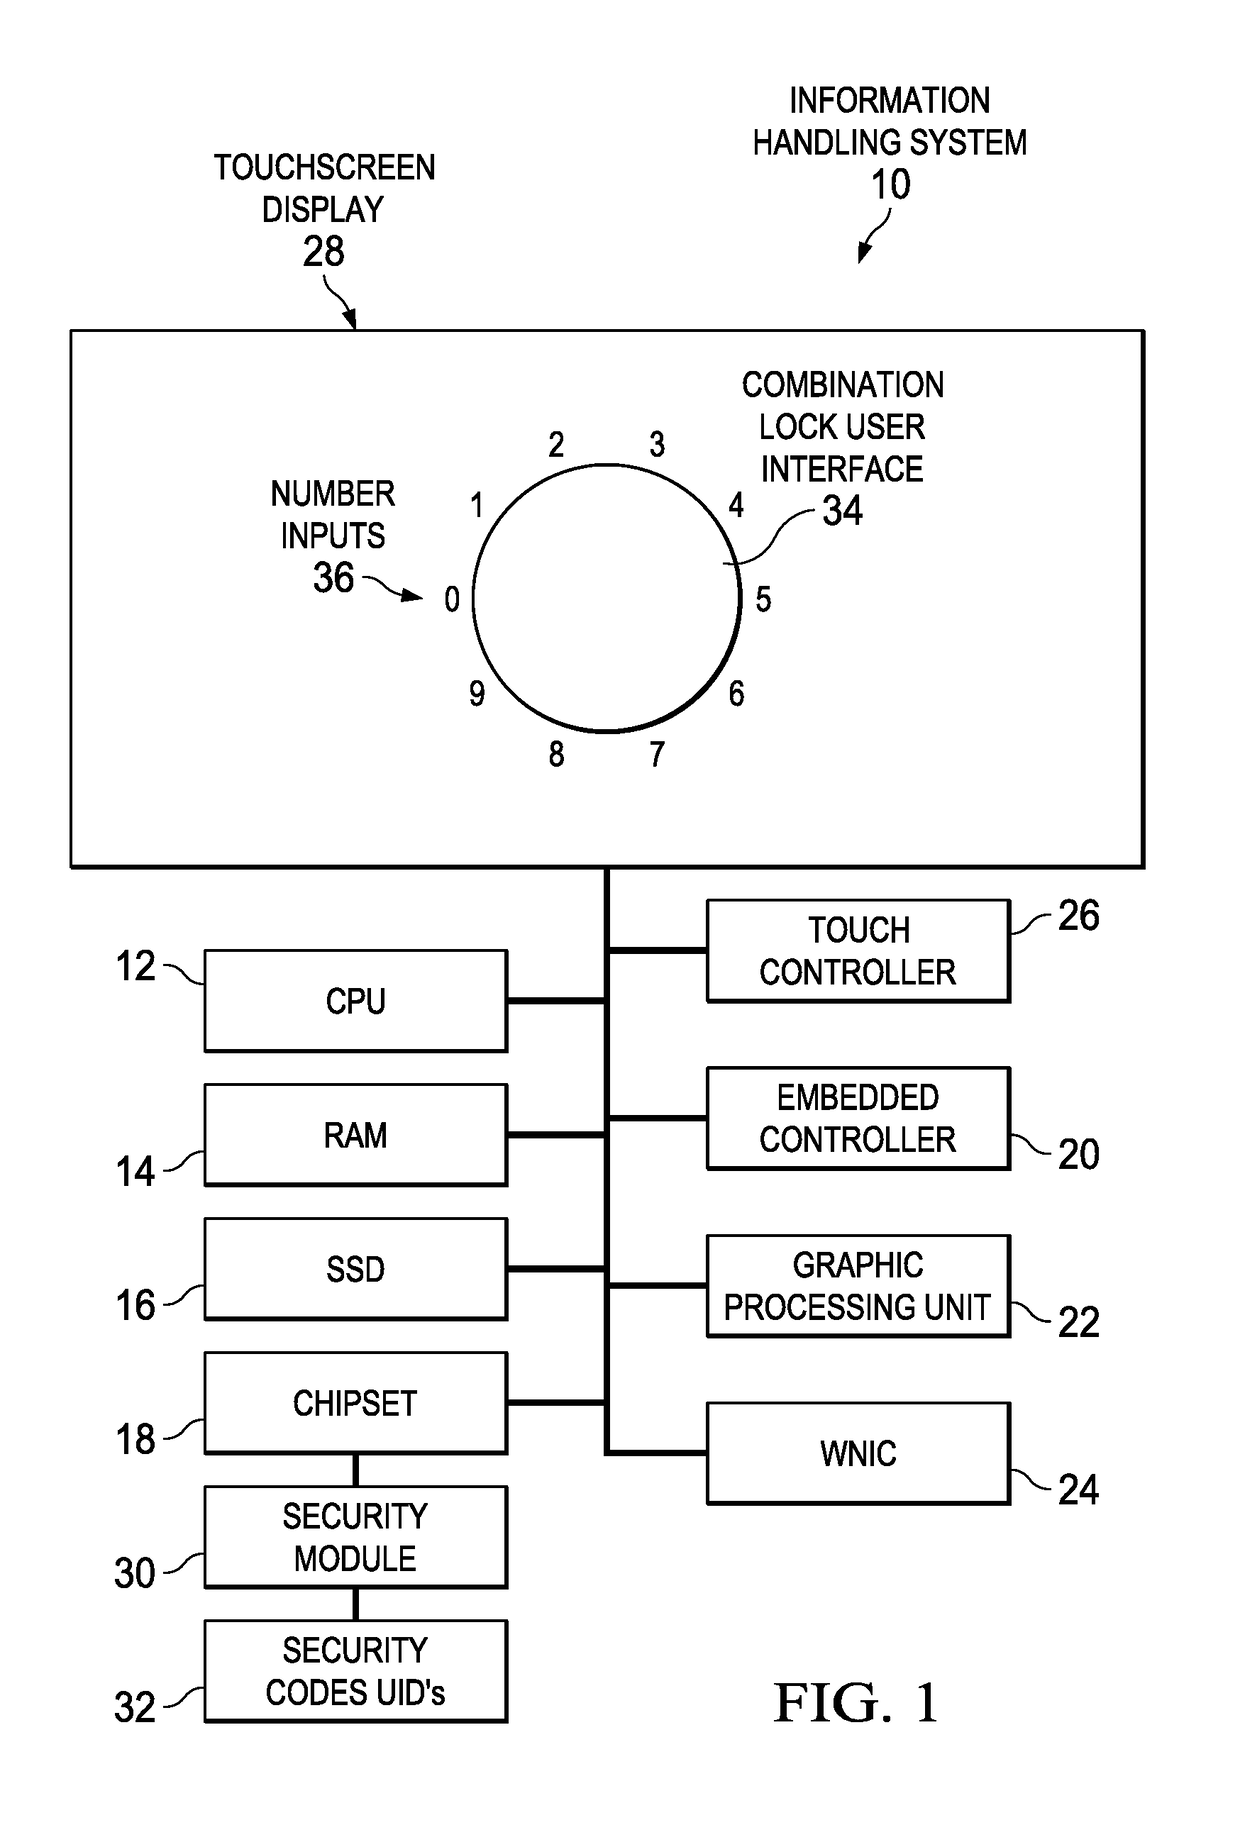 Information Handling System Display Security Access Through Totem Interactions